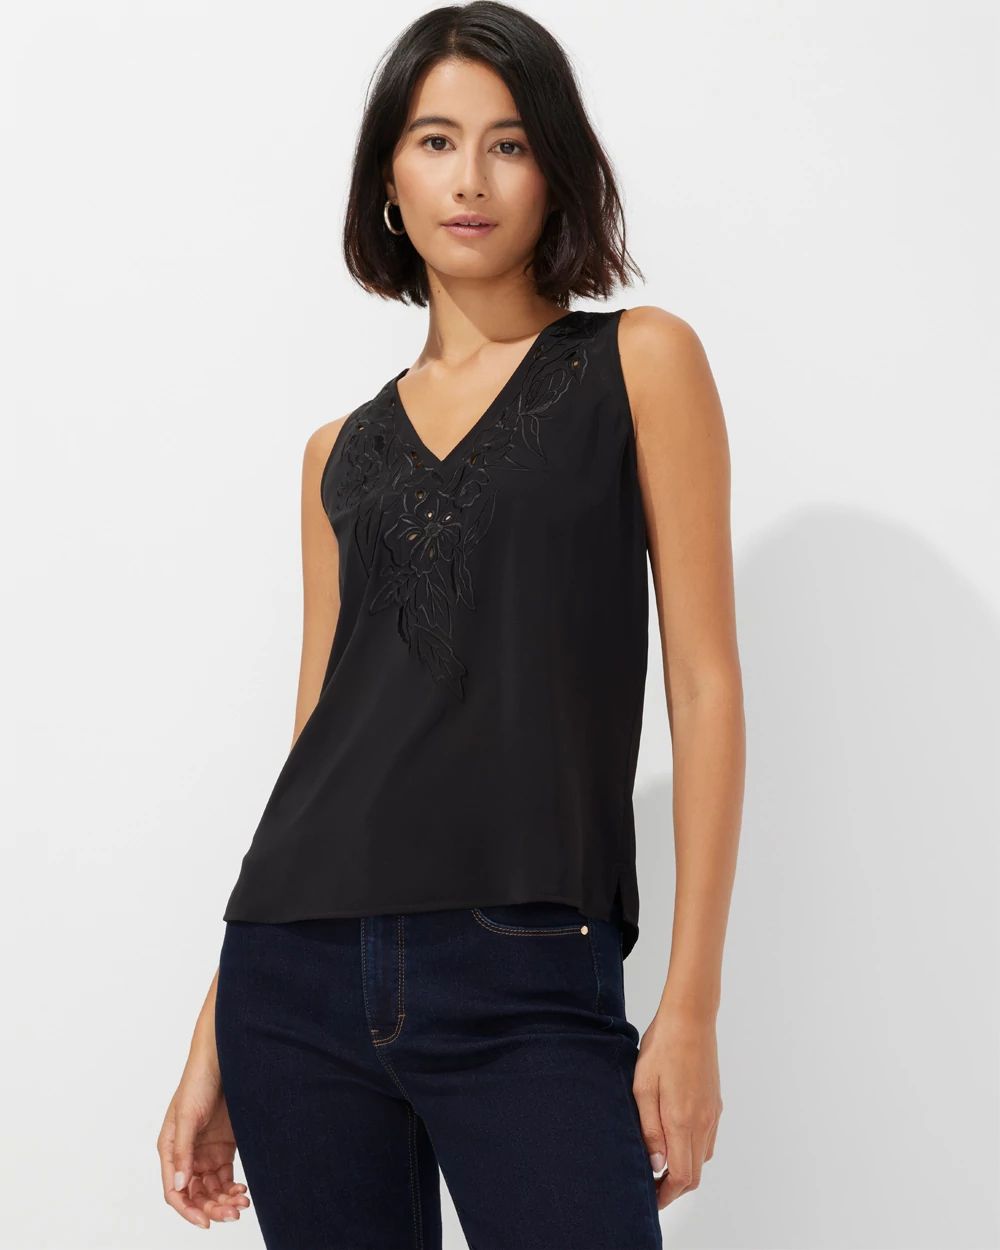 Outlet WHBM Embroidered Cutout V-Tank Top